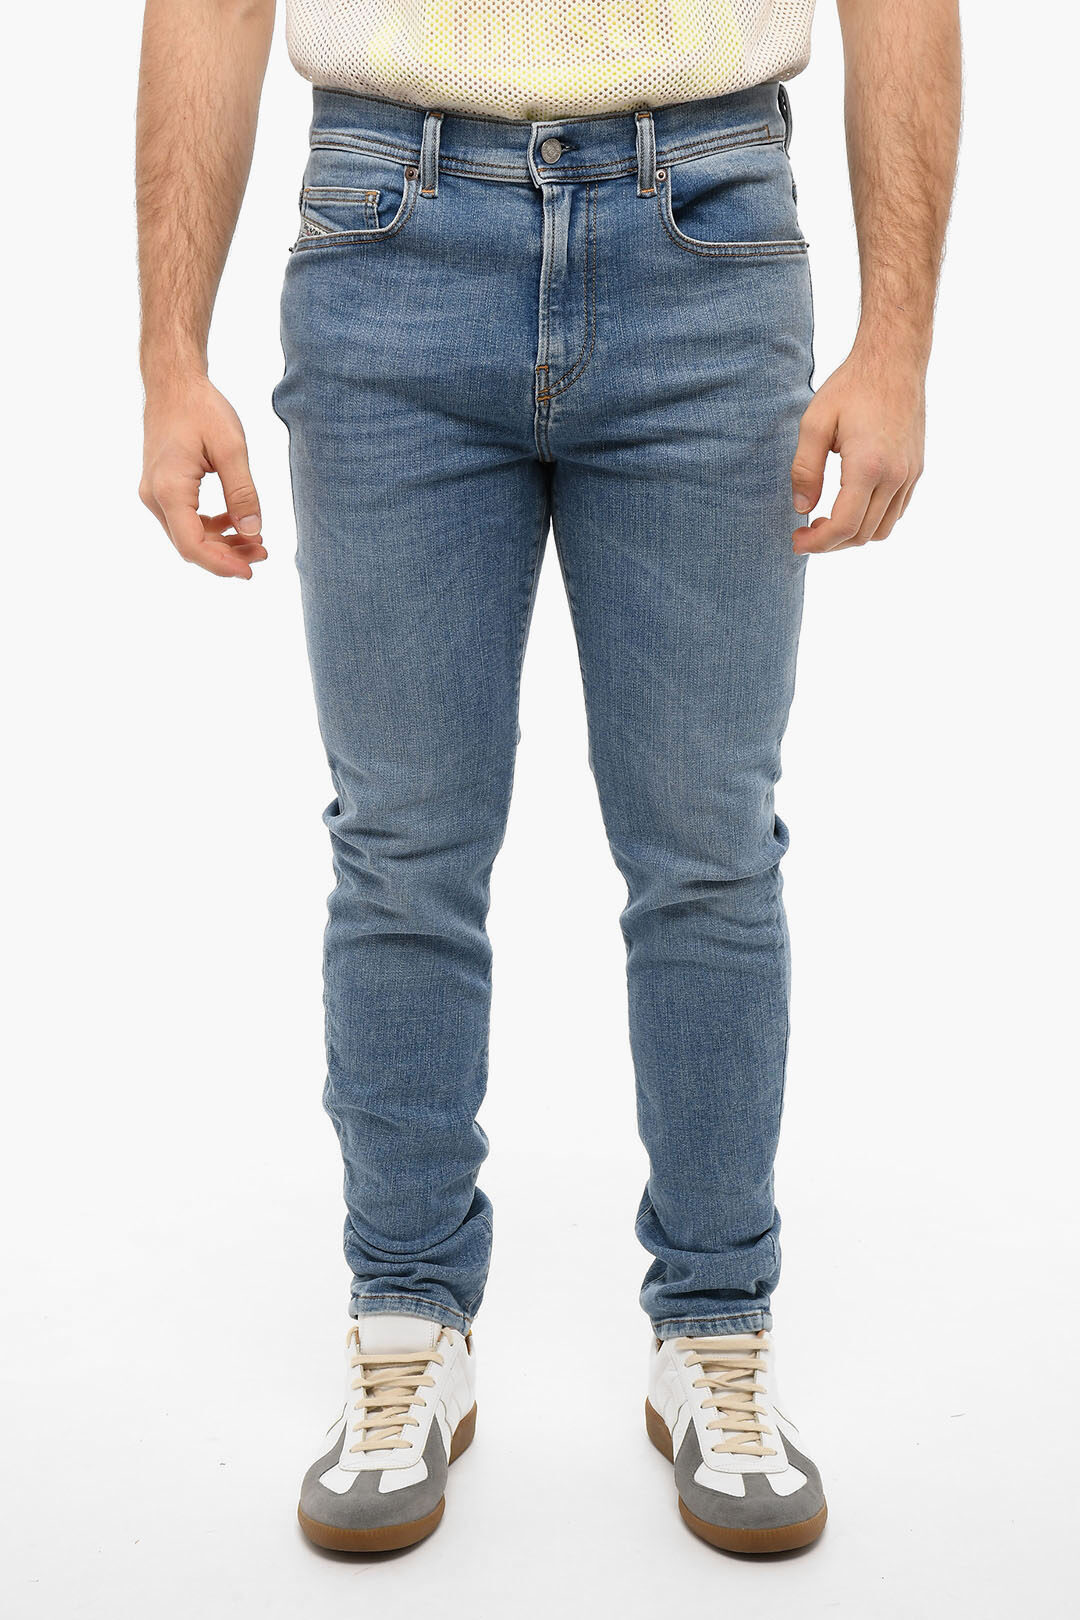 Diesel Light-washed 1983 Skinny Jeans with High Waist men - Glamood Outlet